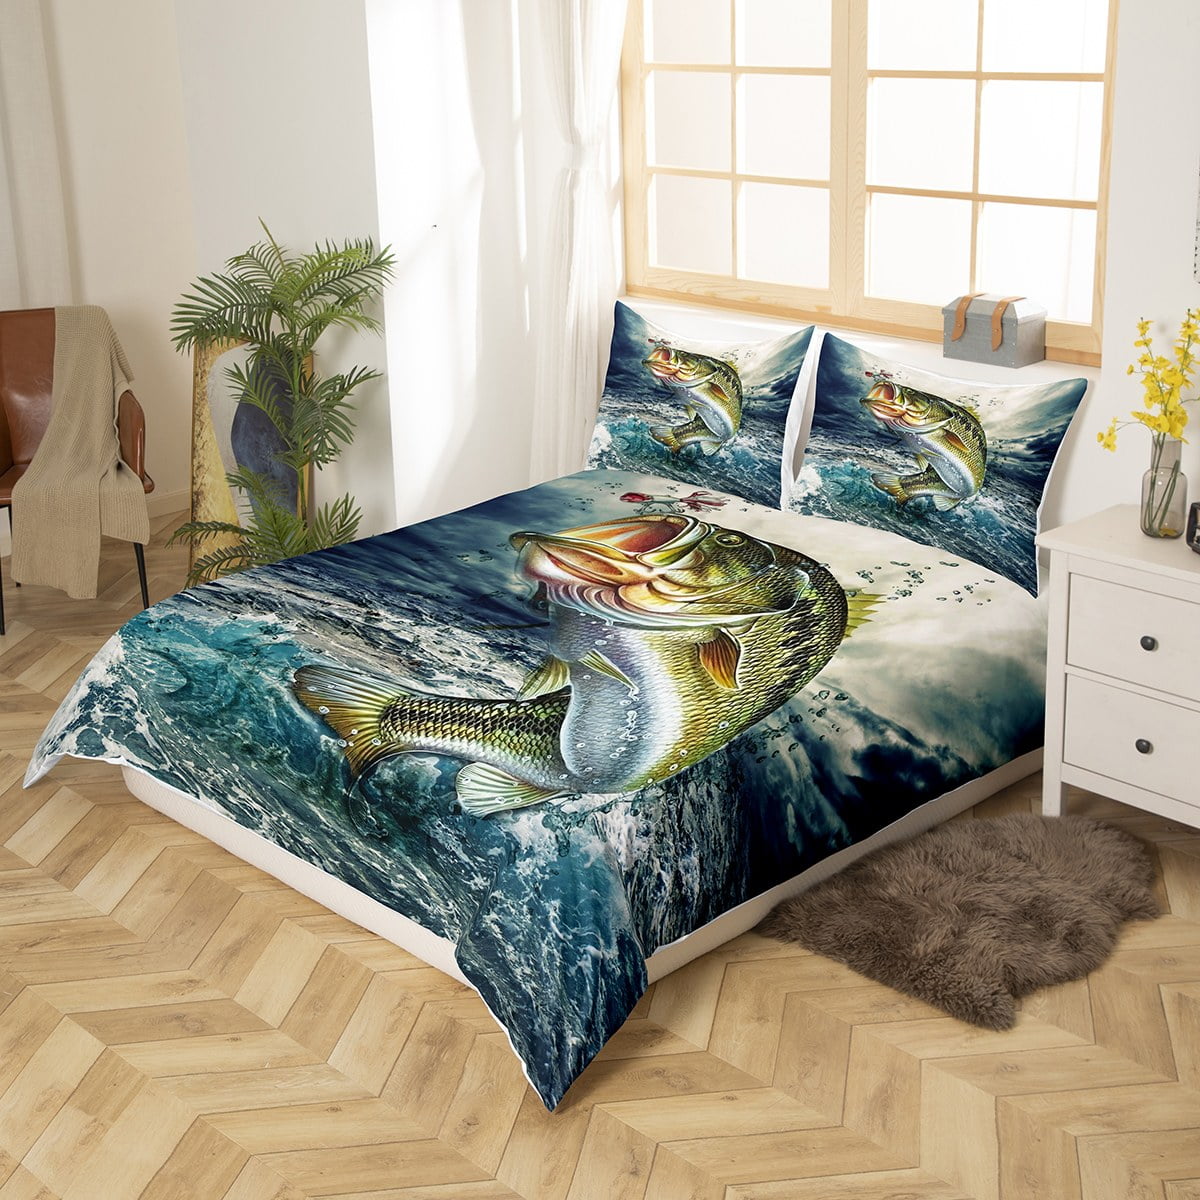  AILONEN Big Pike Fishing Comforter Set Queen Size, Hunting and  Fishing Bedding Set for Boys Teen,Bass Fish Duvet Set,3 Pieces,1 Quilt and  2 Pillowcases,Soft Microfibre : Home & Kitchen